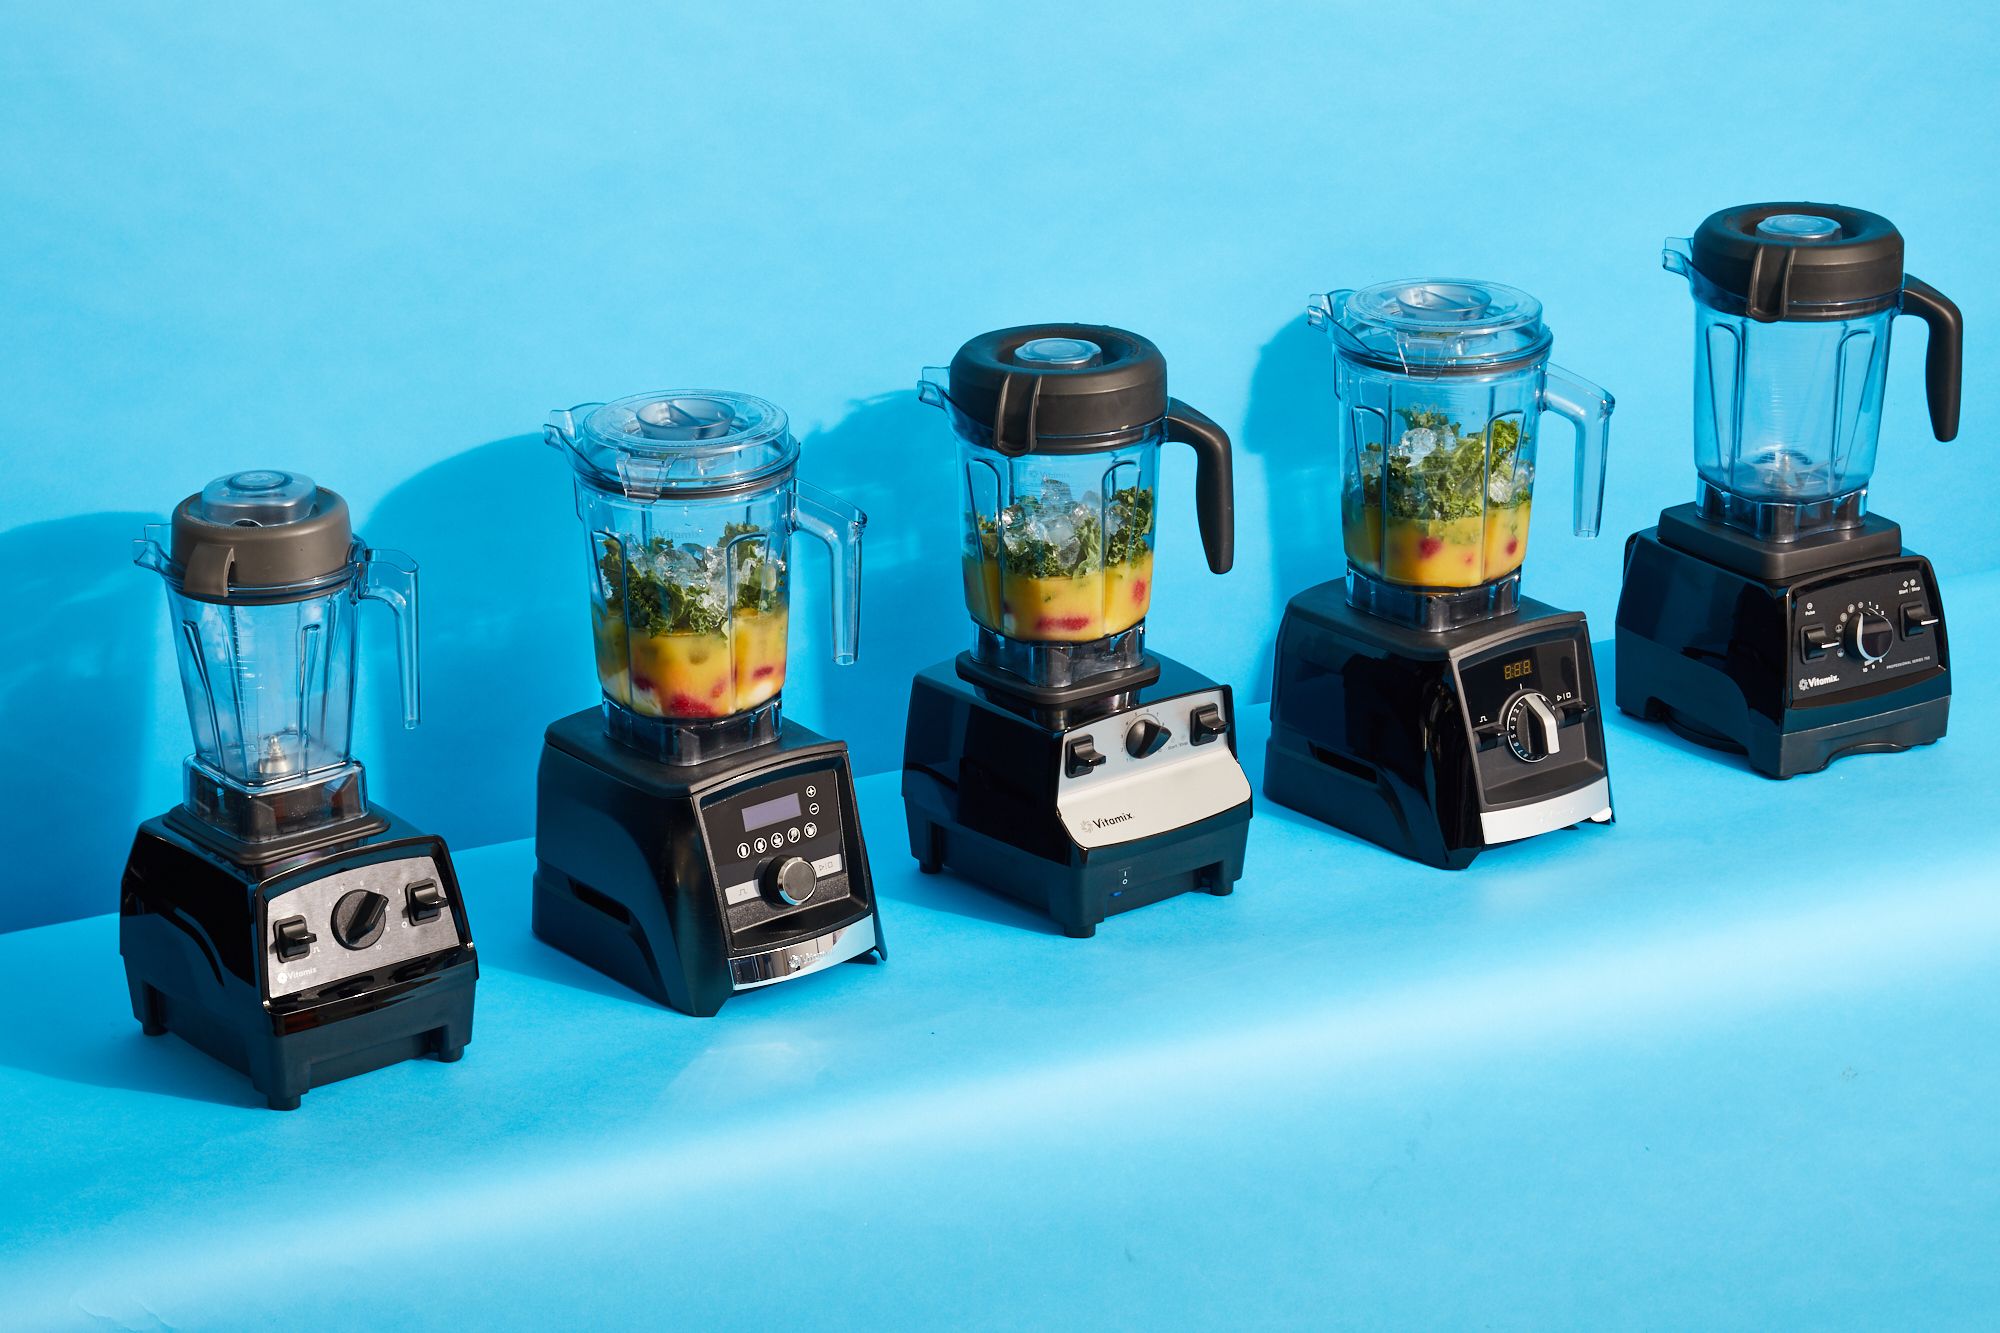 The 8 Best Vitamix Blenders, Tested and Reviewed